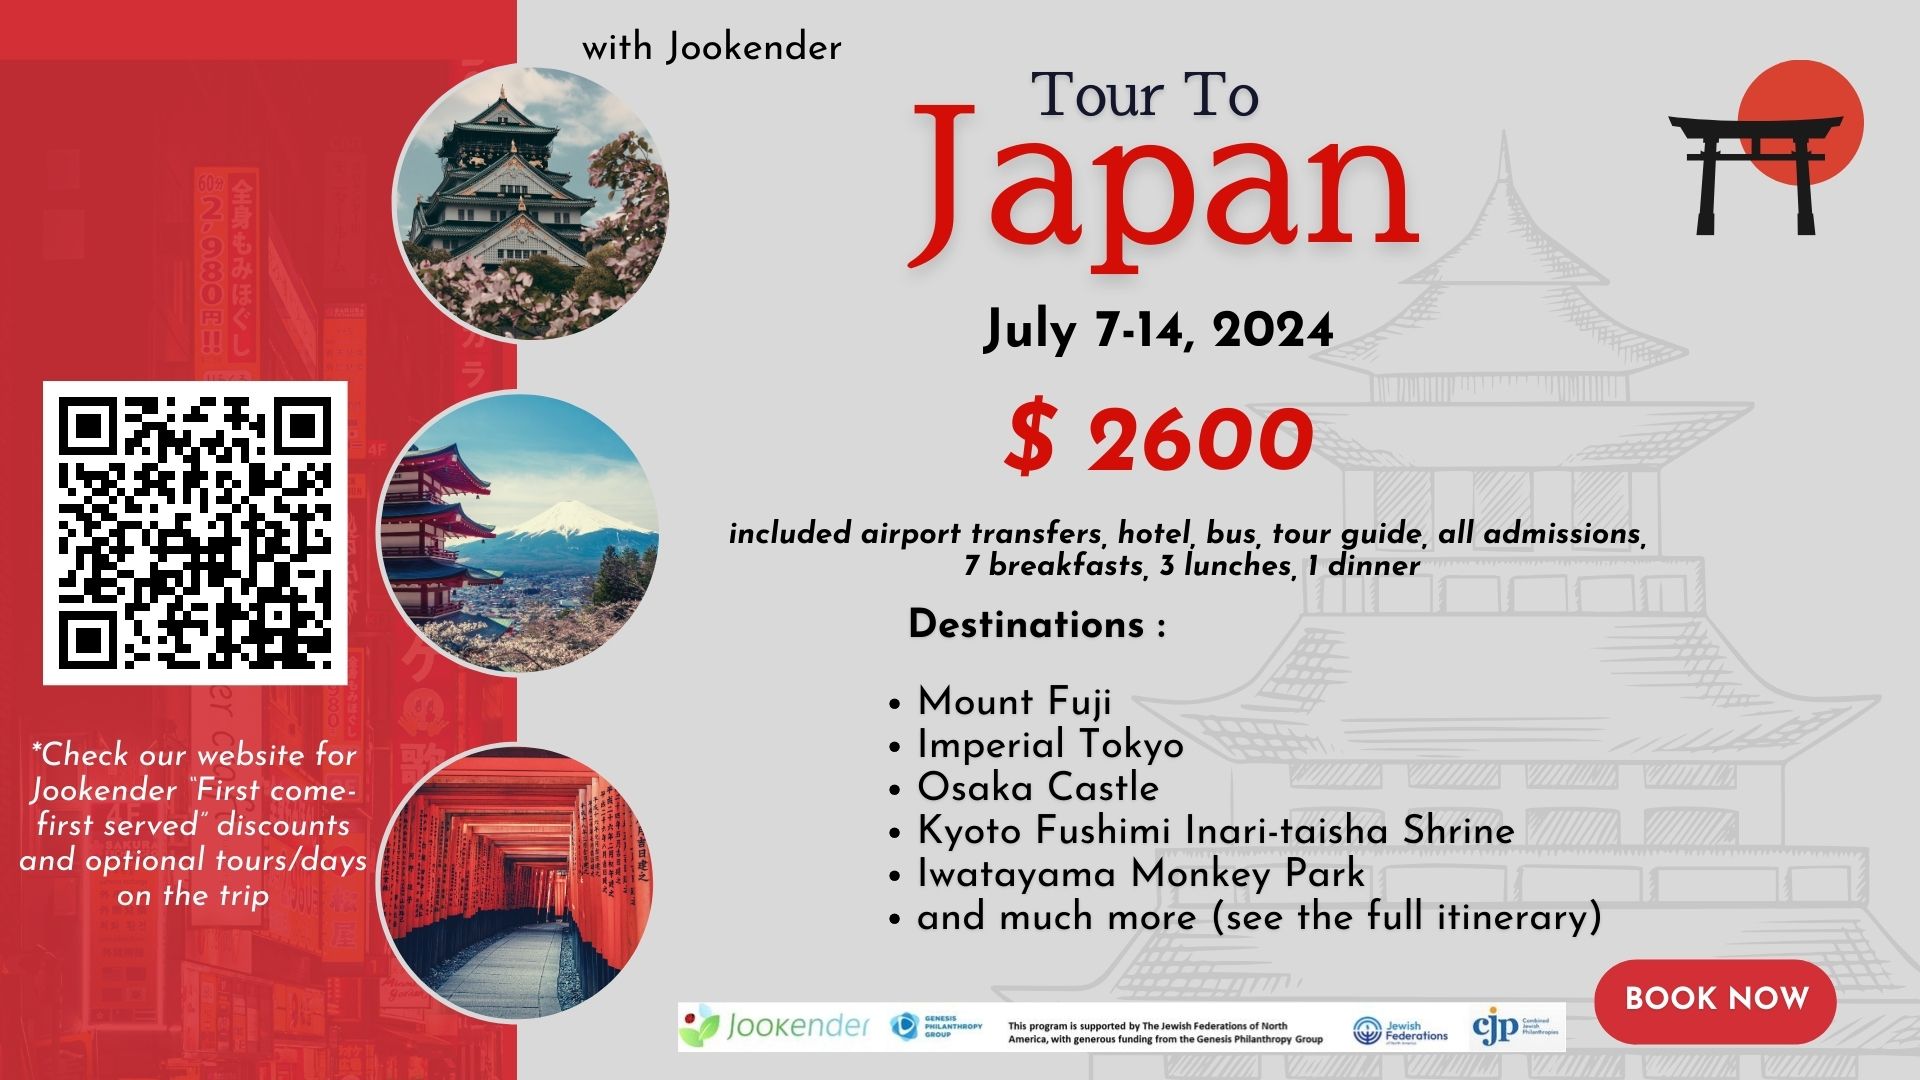 Tour to Japan - Add Options